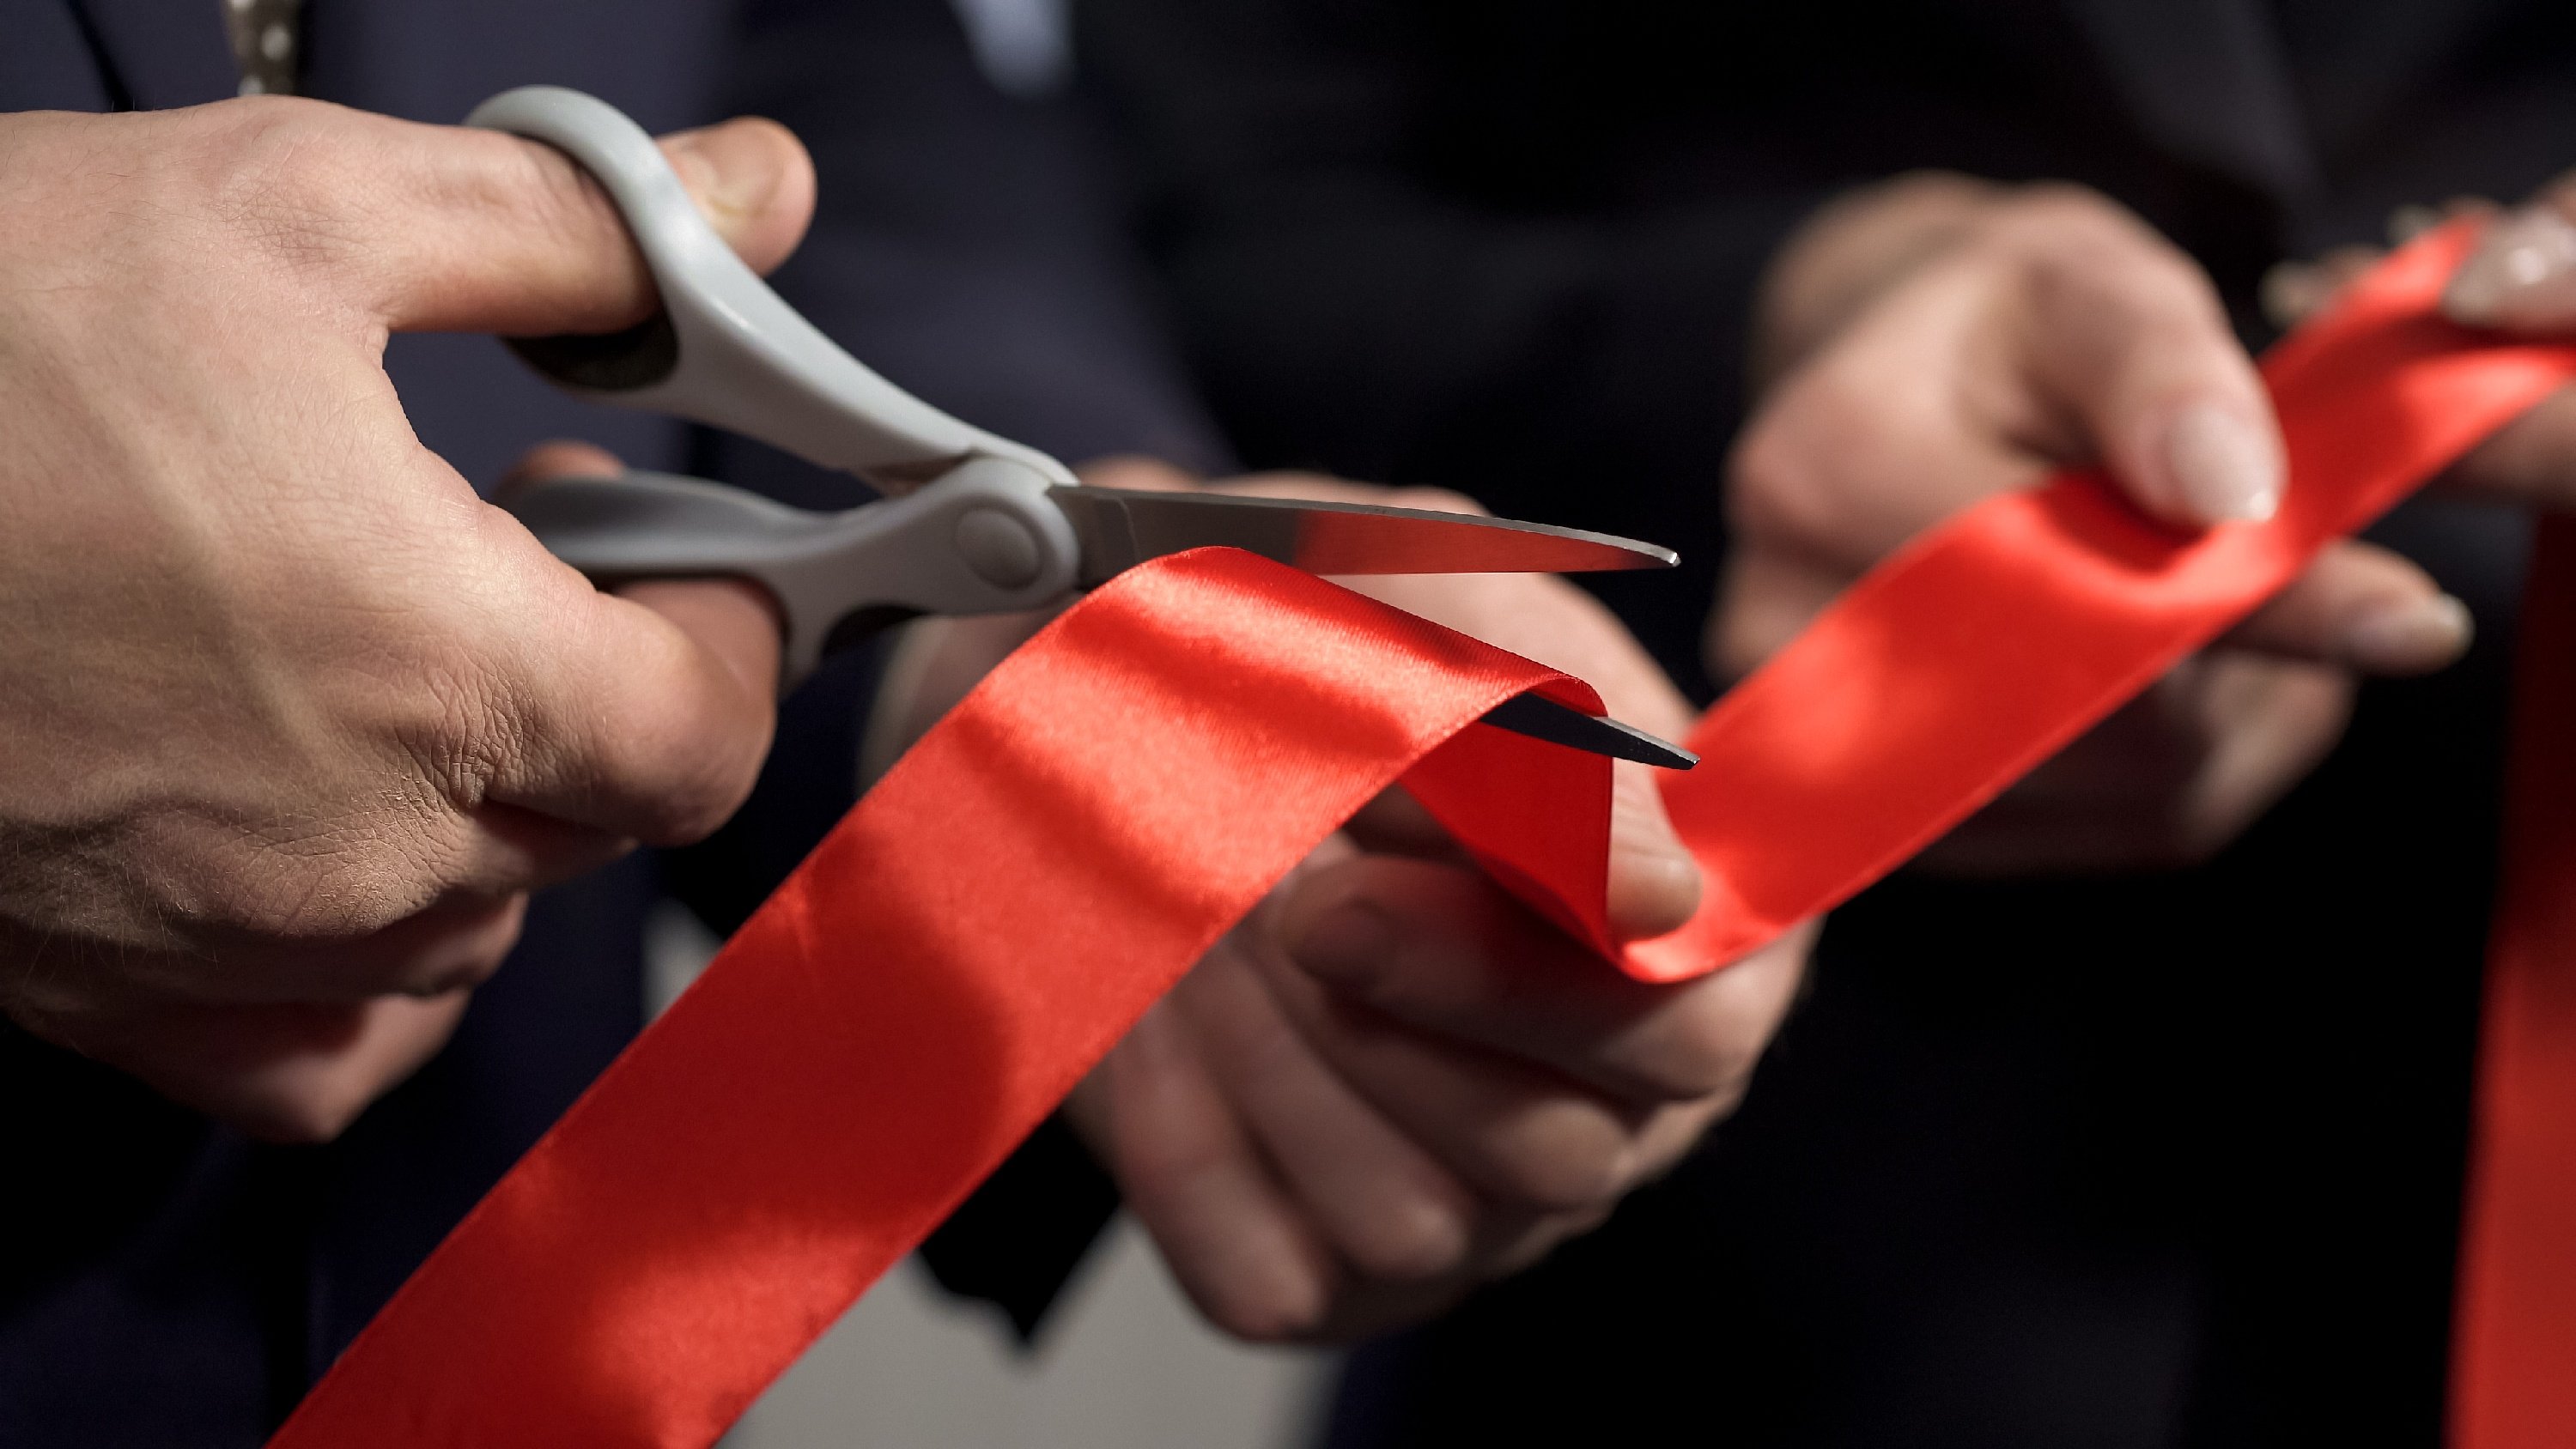 Red tape being cut with scissors